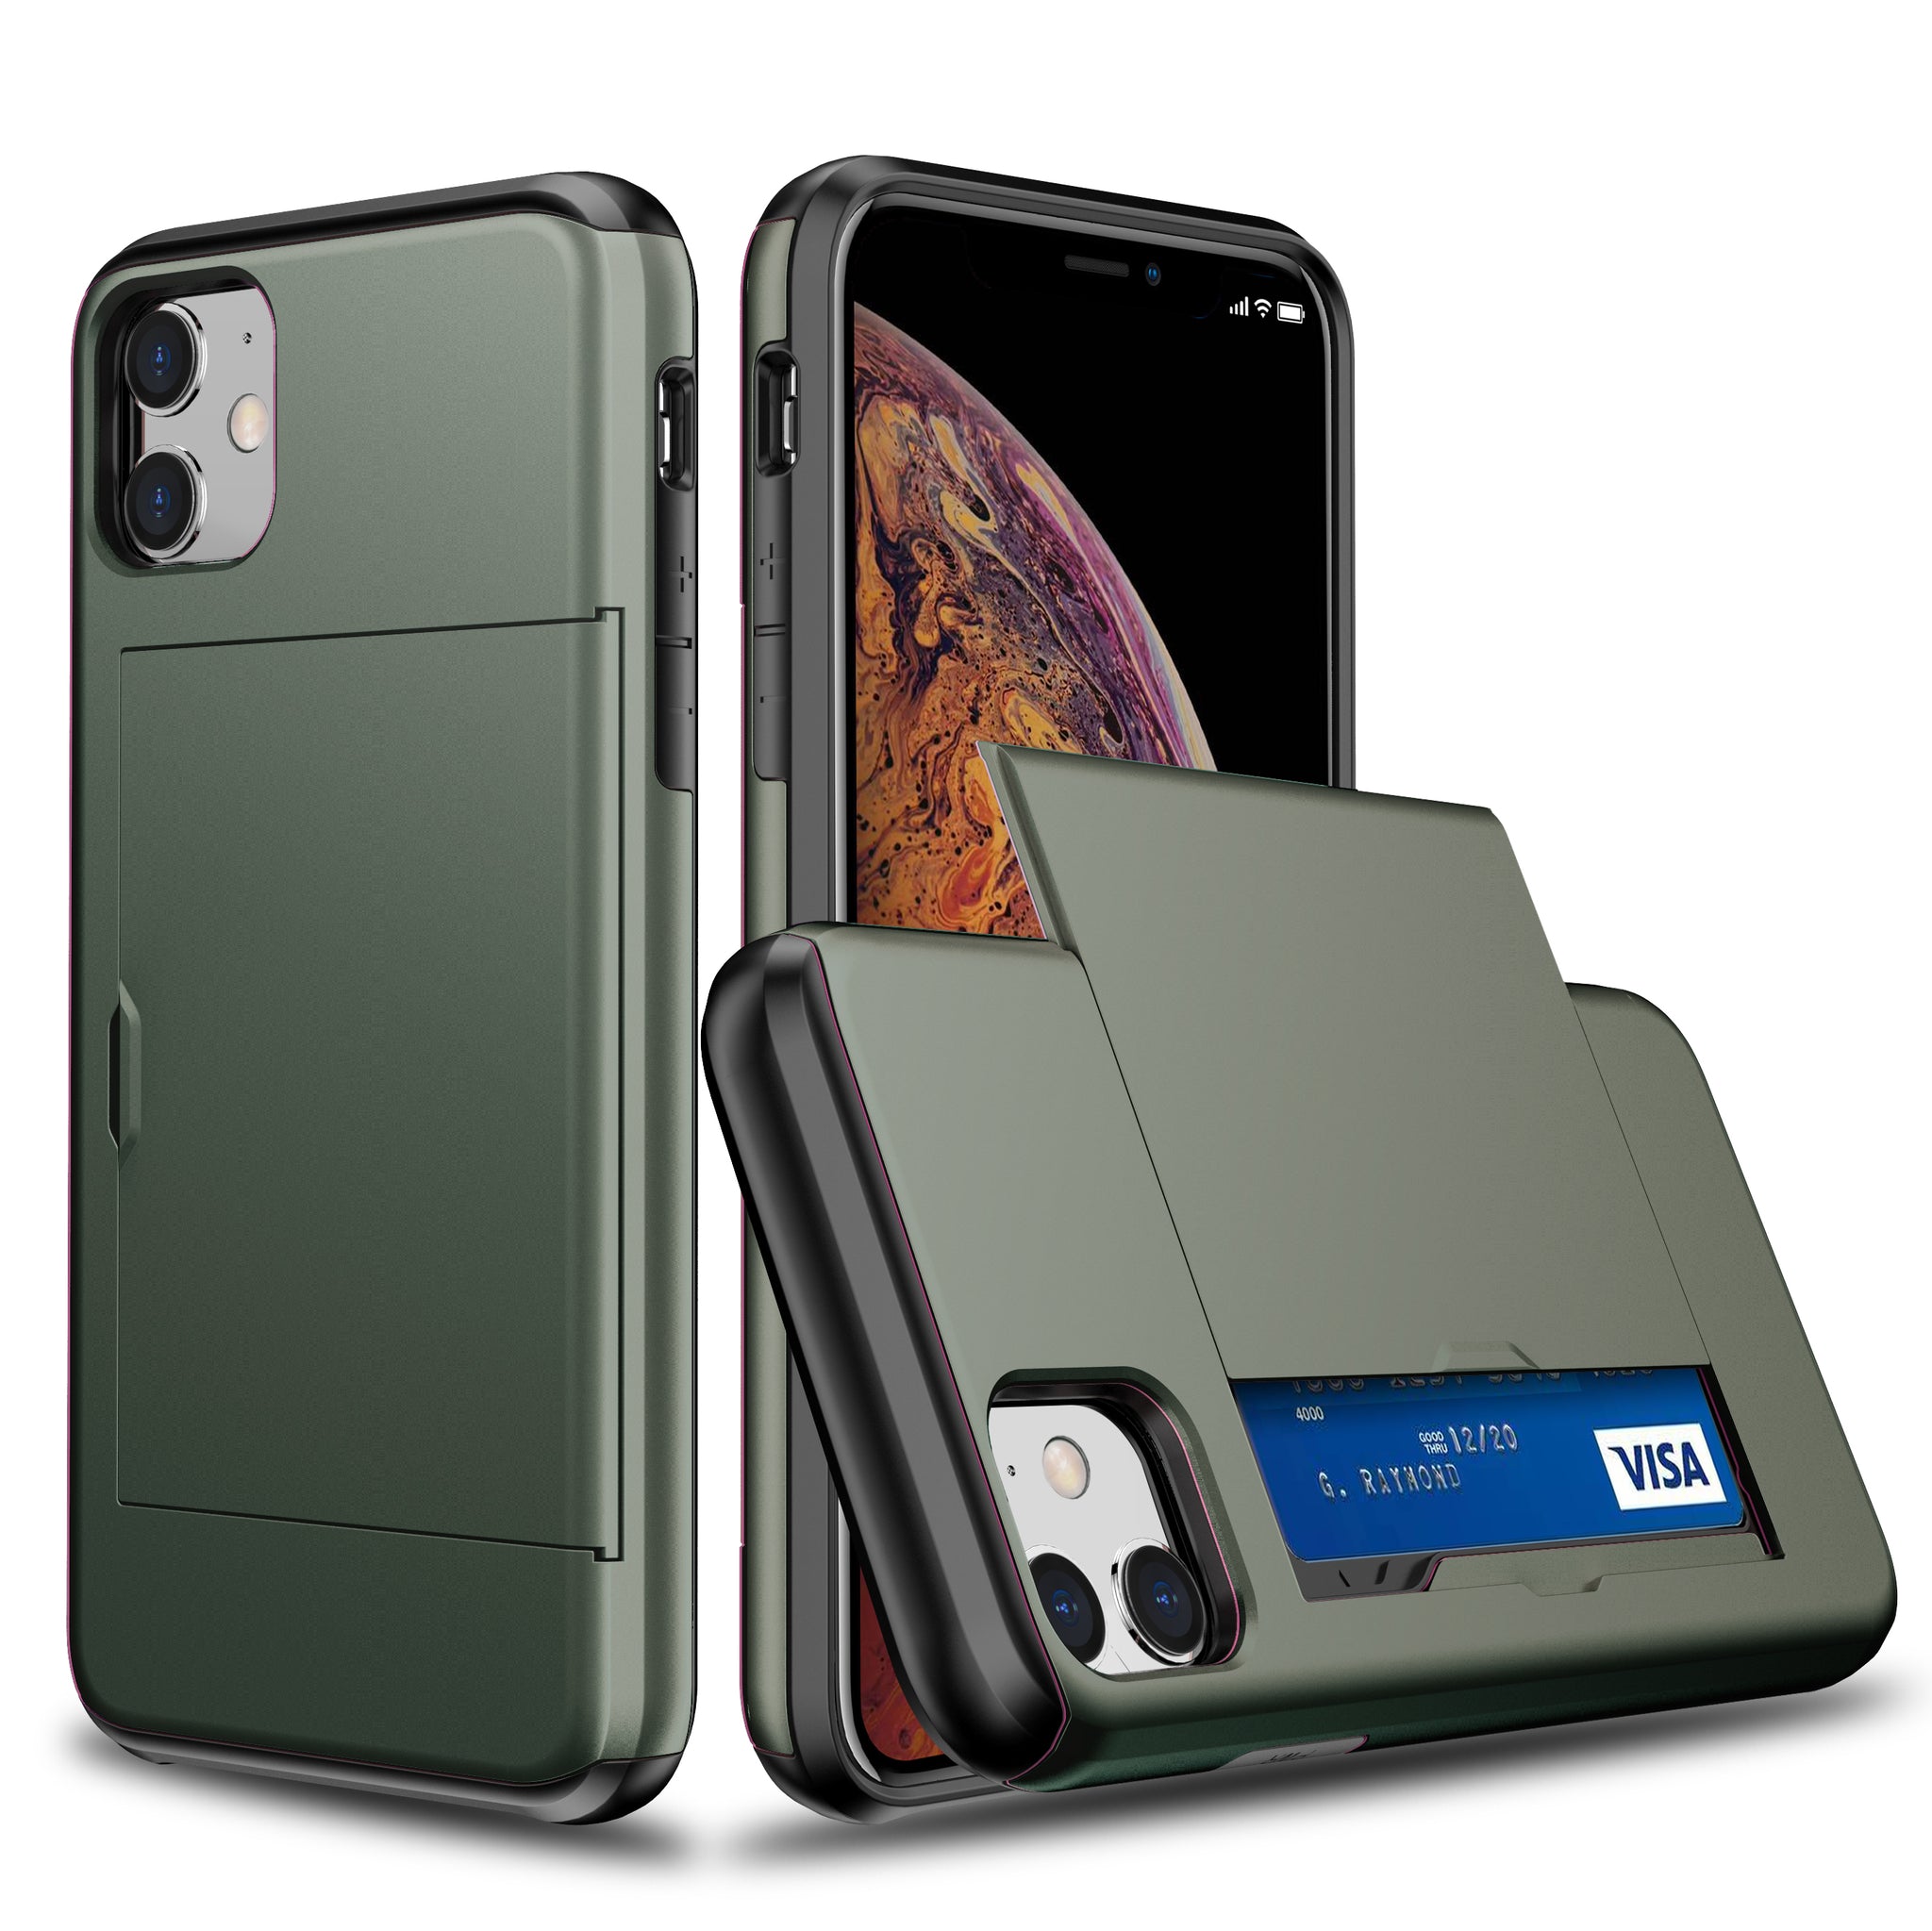 Shockproof Wallet Mobile Phone Case for iPhone11